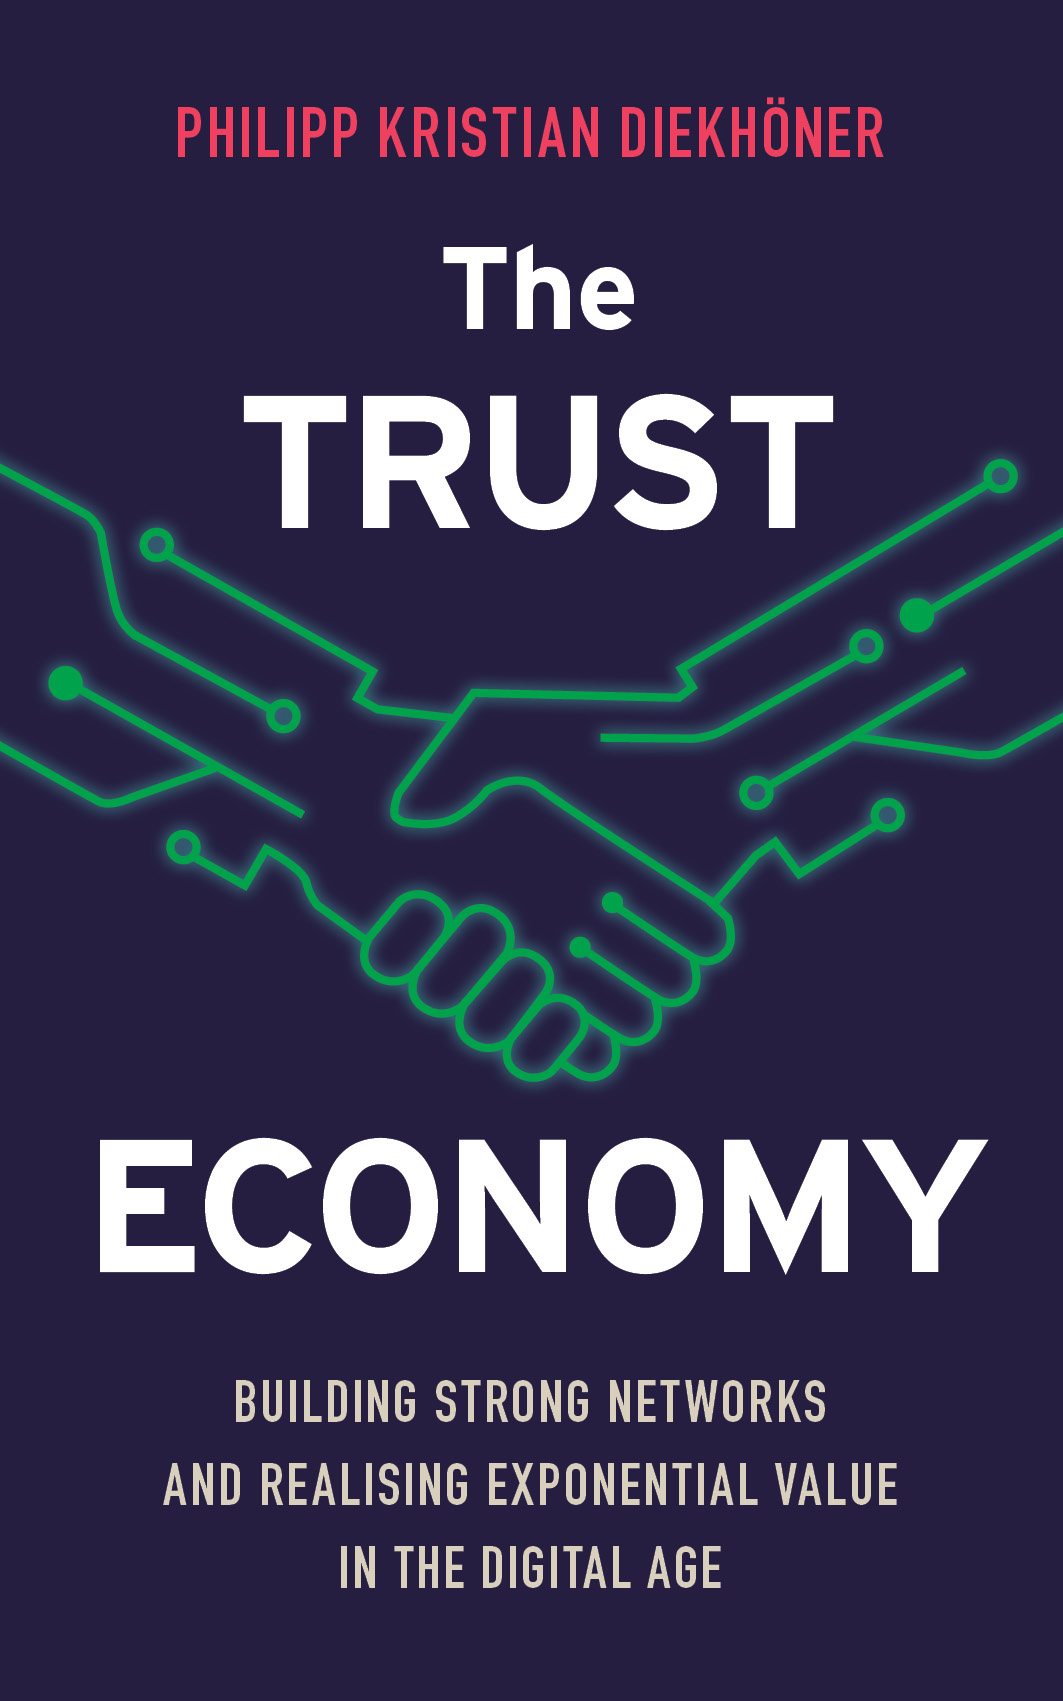 Kristian's new book, The Trust Economy, explores this intricate link and gives practical advice on how to build trust and succeed in the digital age.